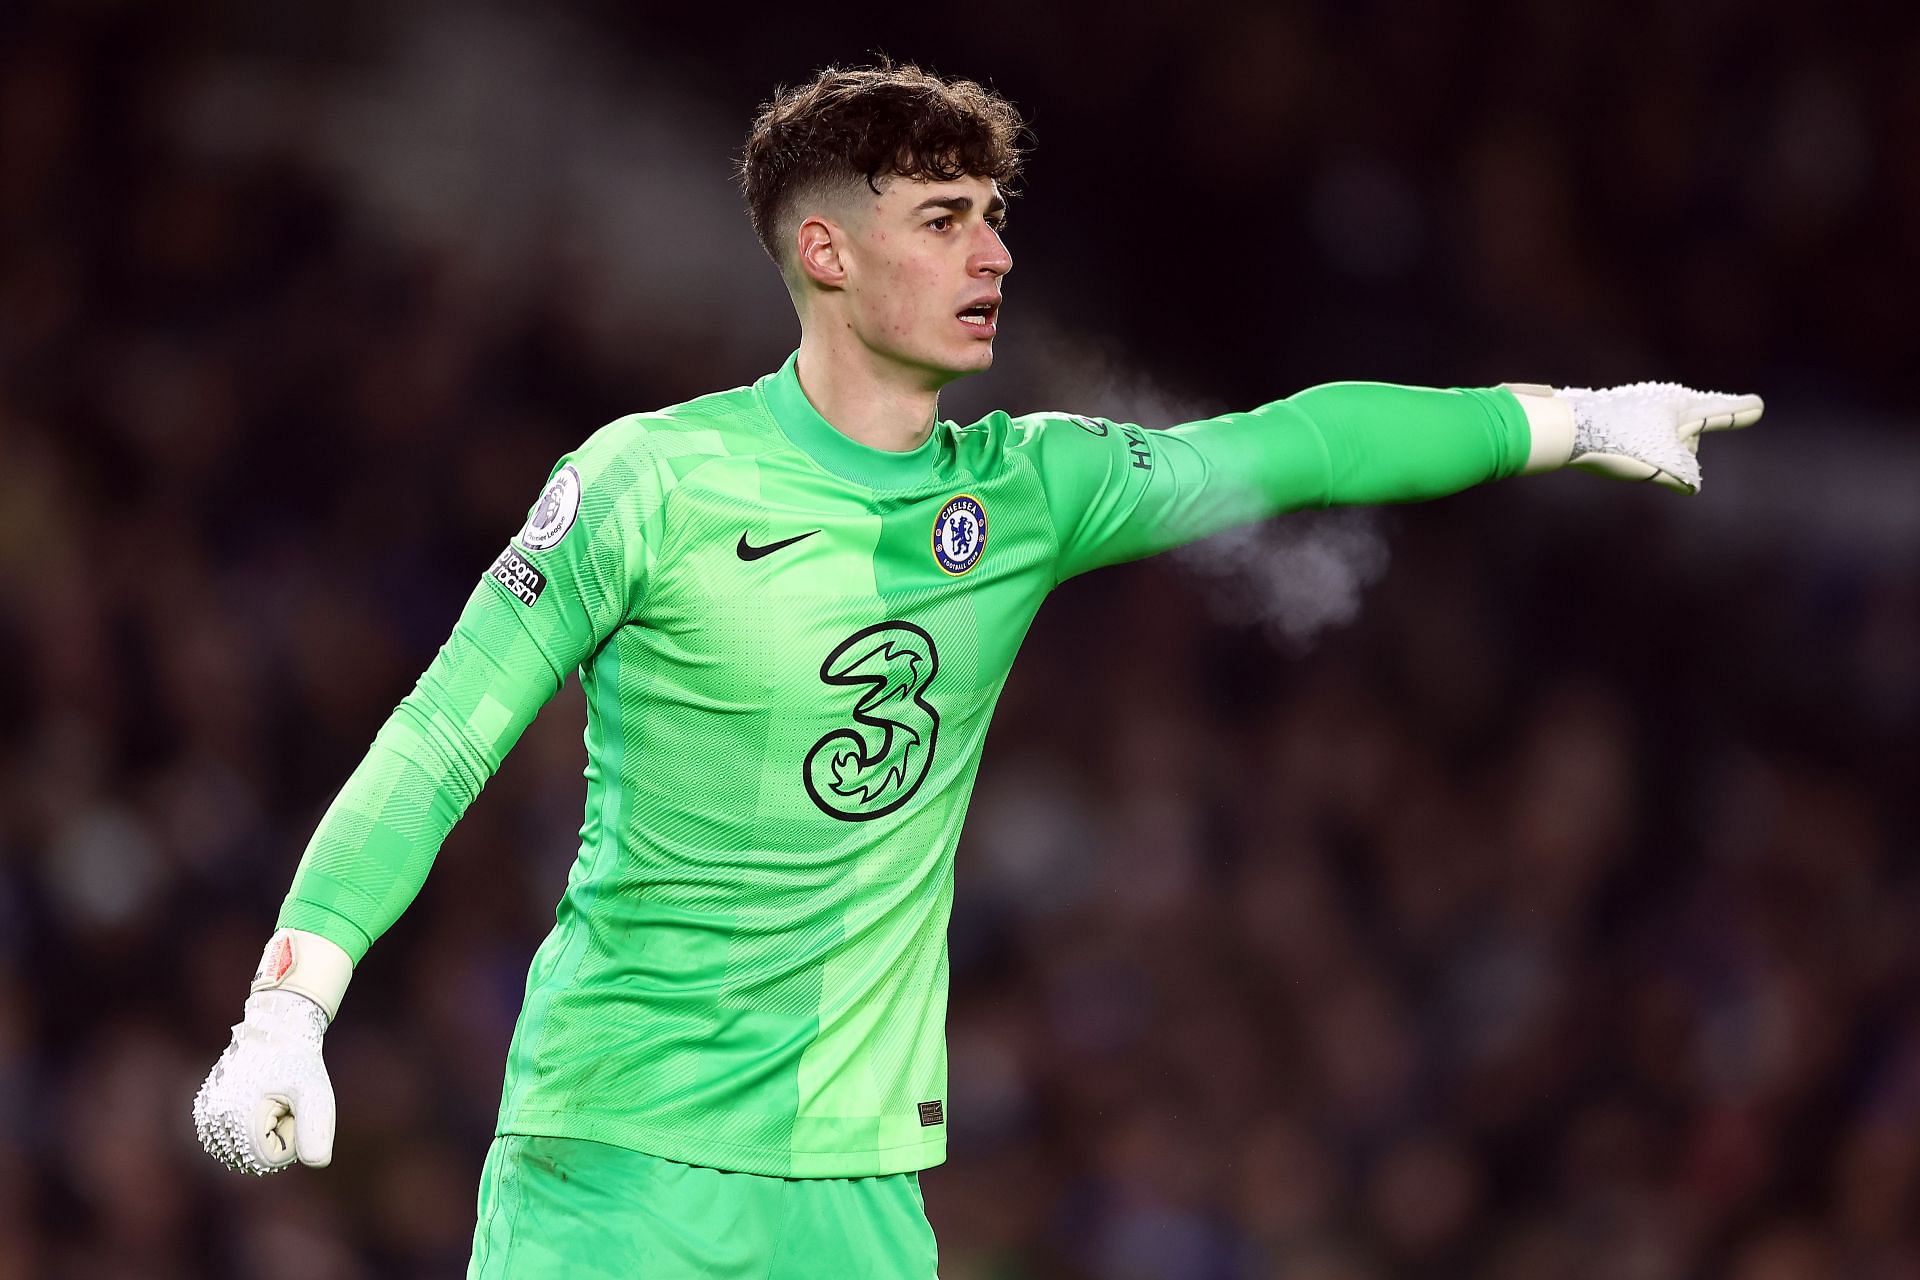 Kepa has played his least league game since joining the Blues